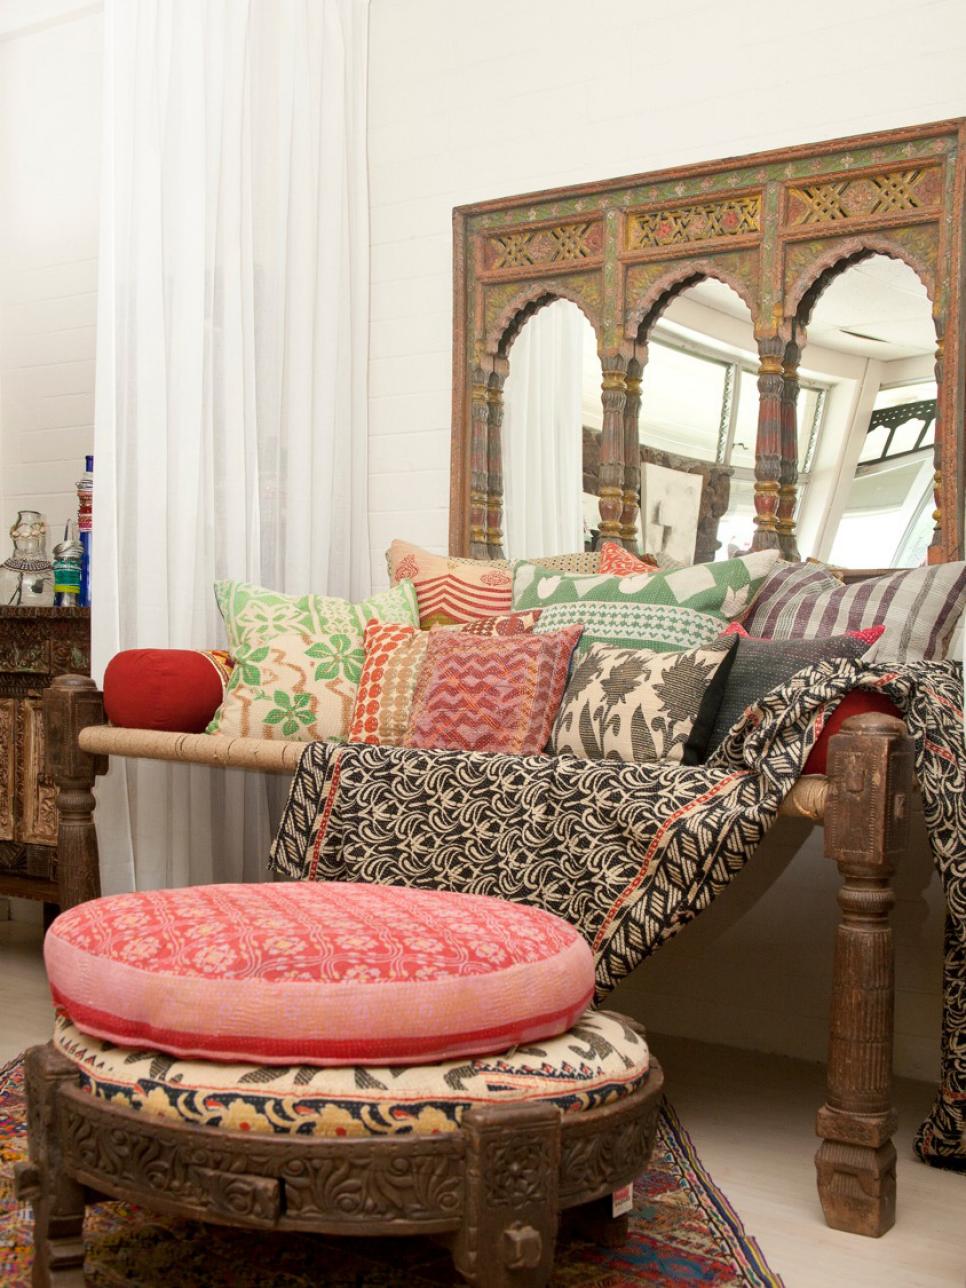 10 Dreamy Daybeds We Adore HGTV